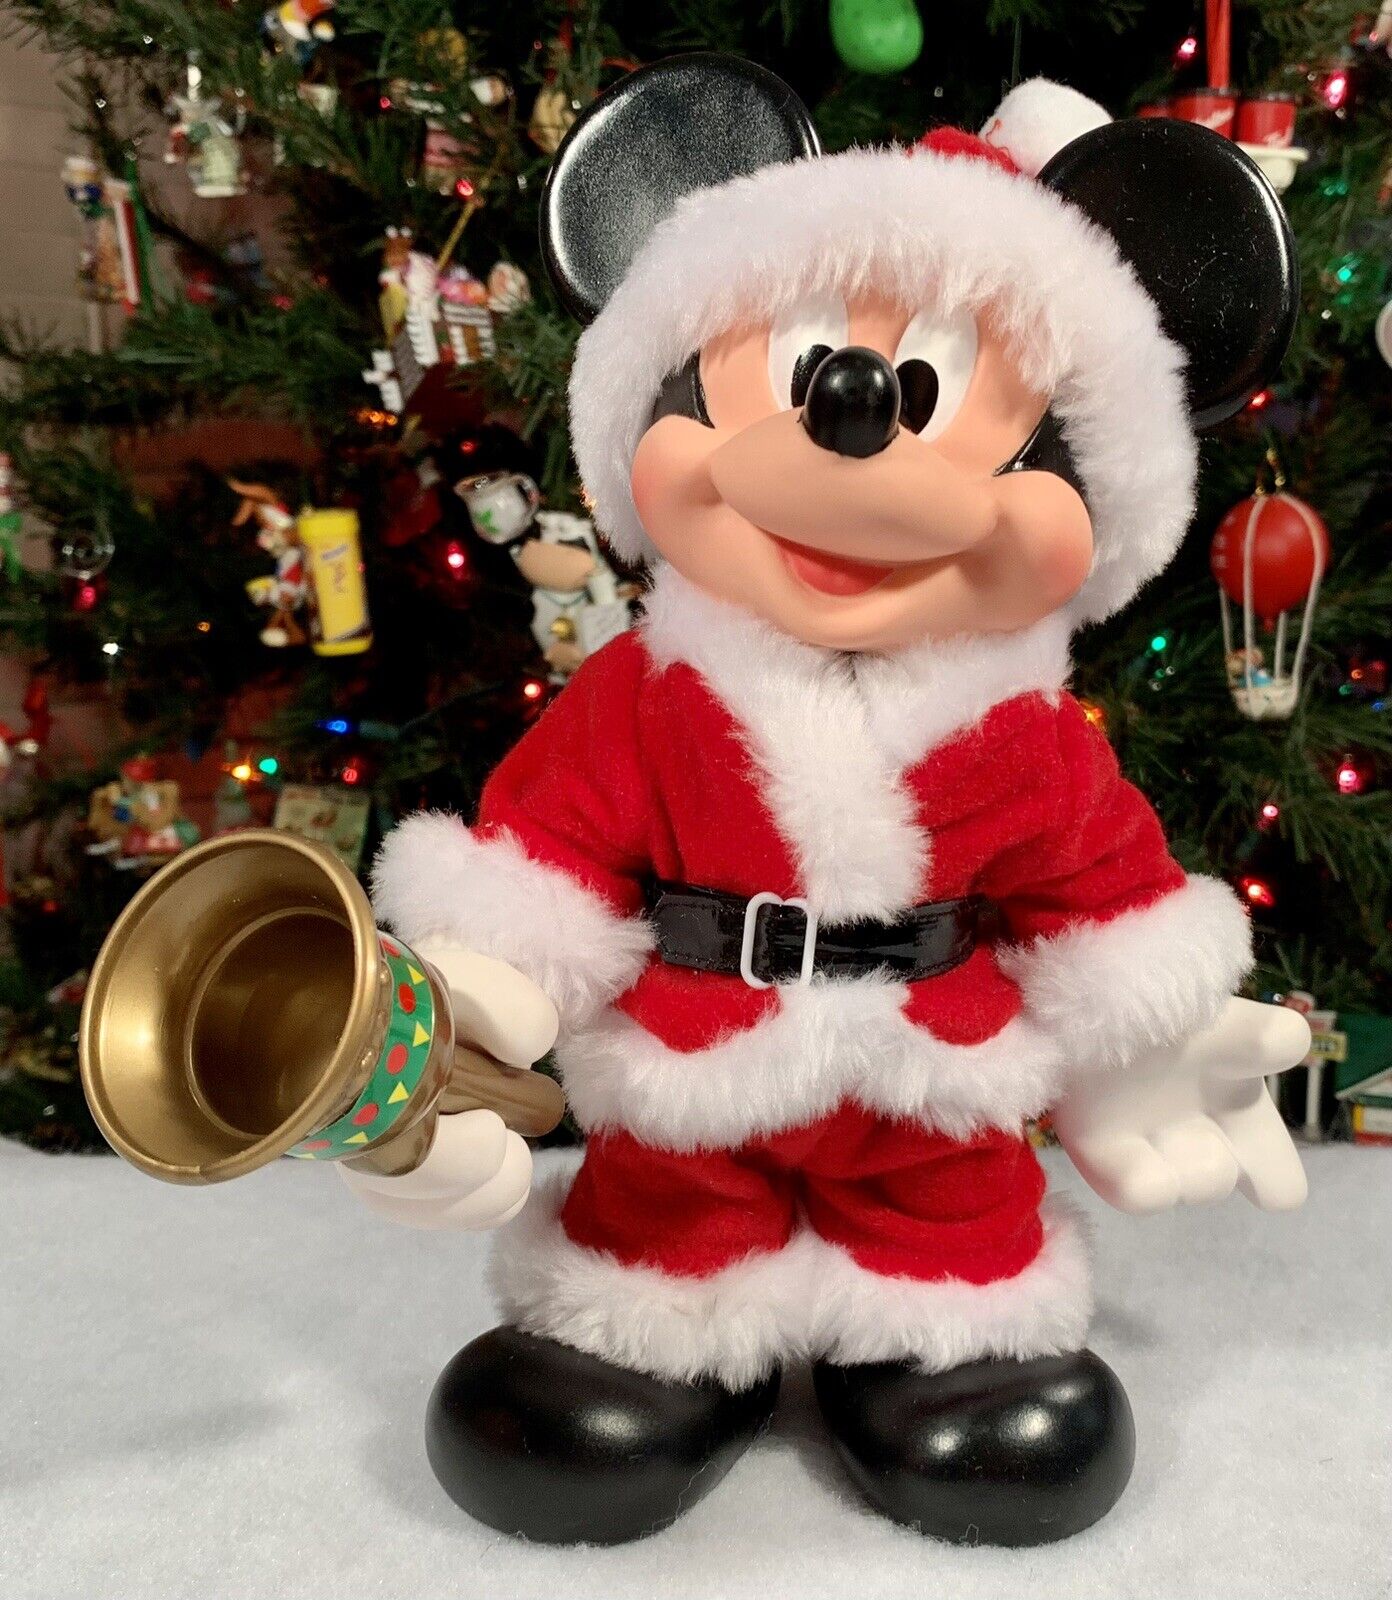 Vintage Arco 9” Posable SANTA MICKEY Mouse Figurine With Bell & Greeting Card